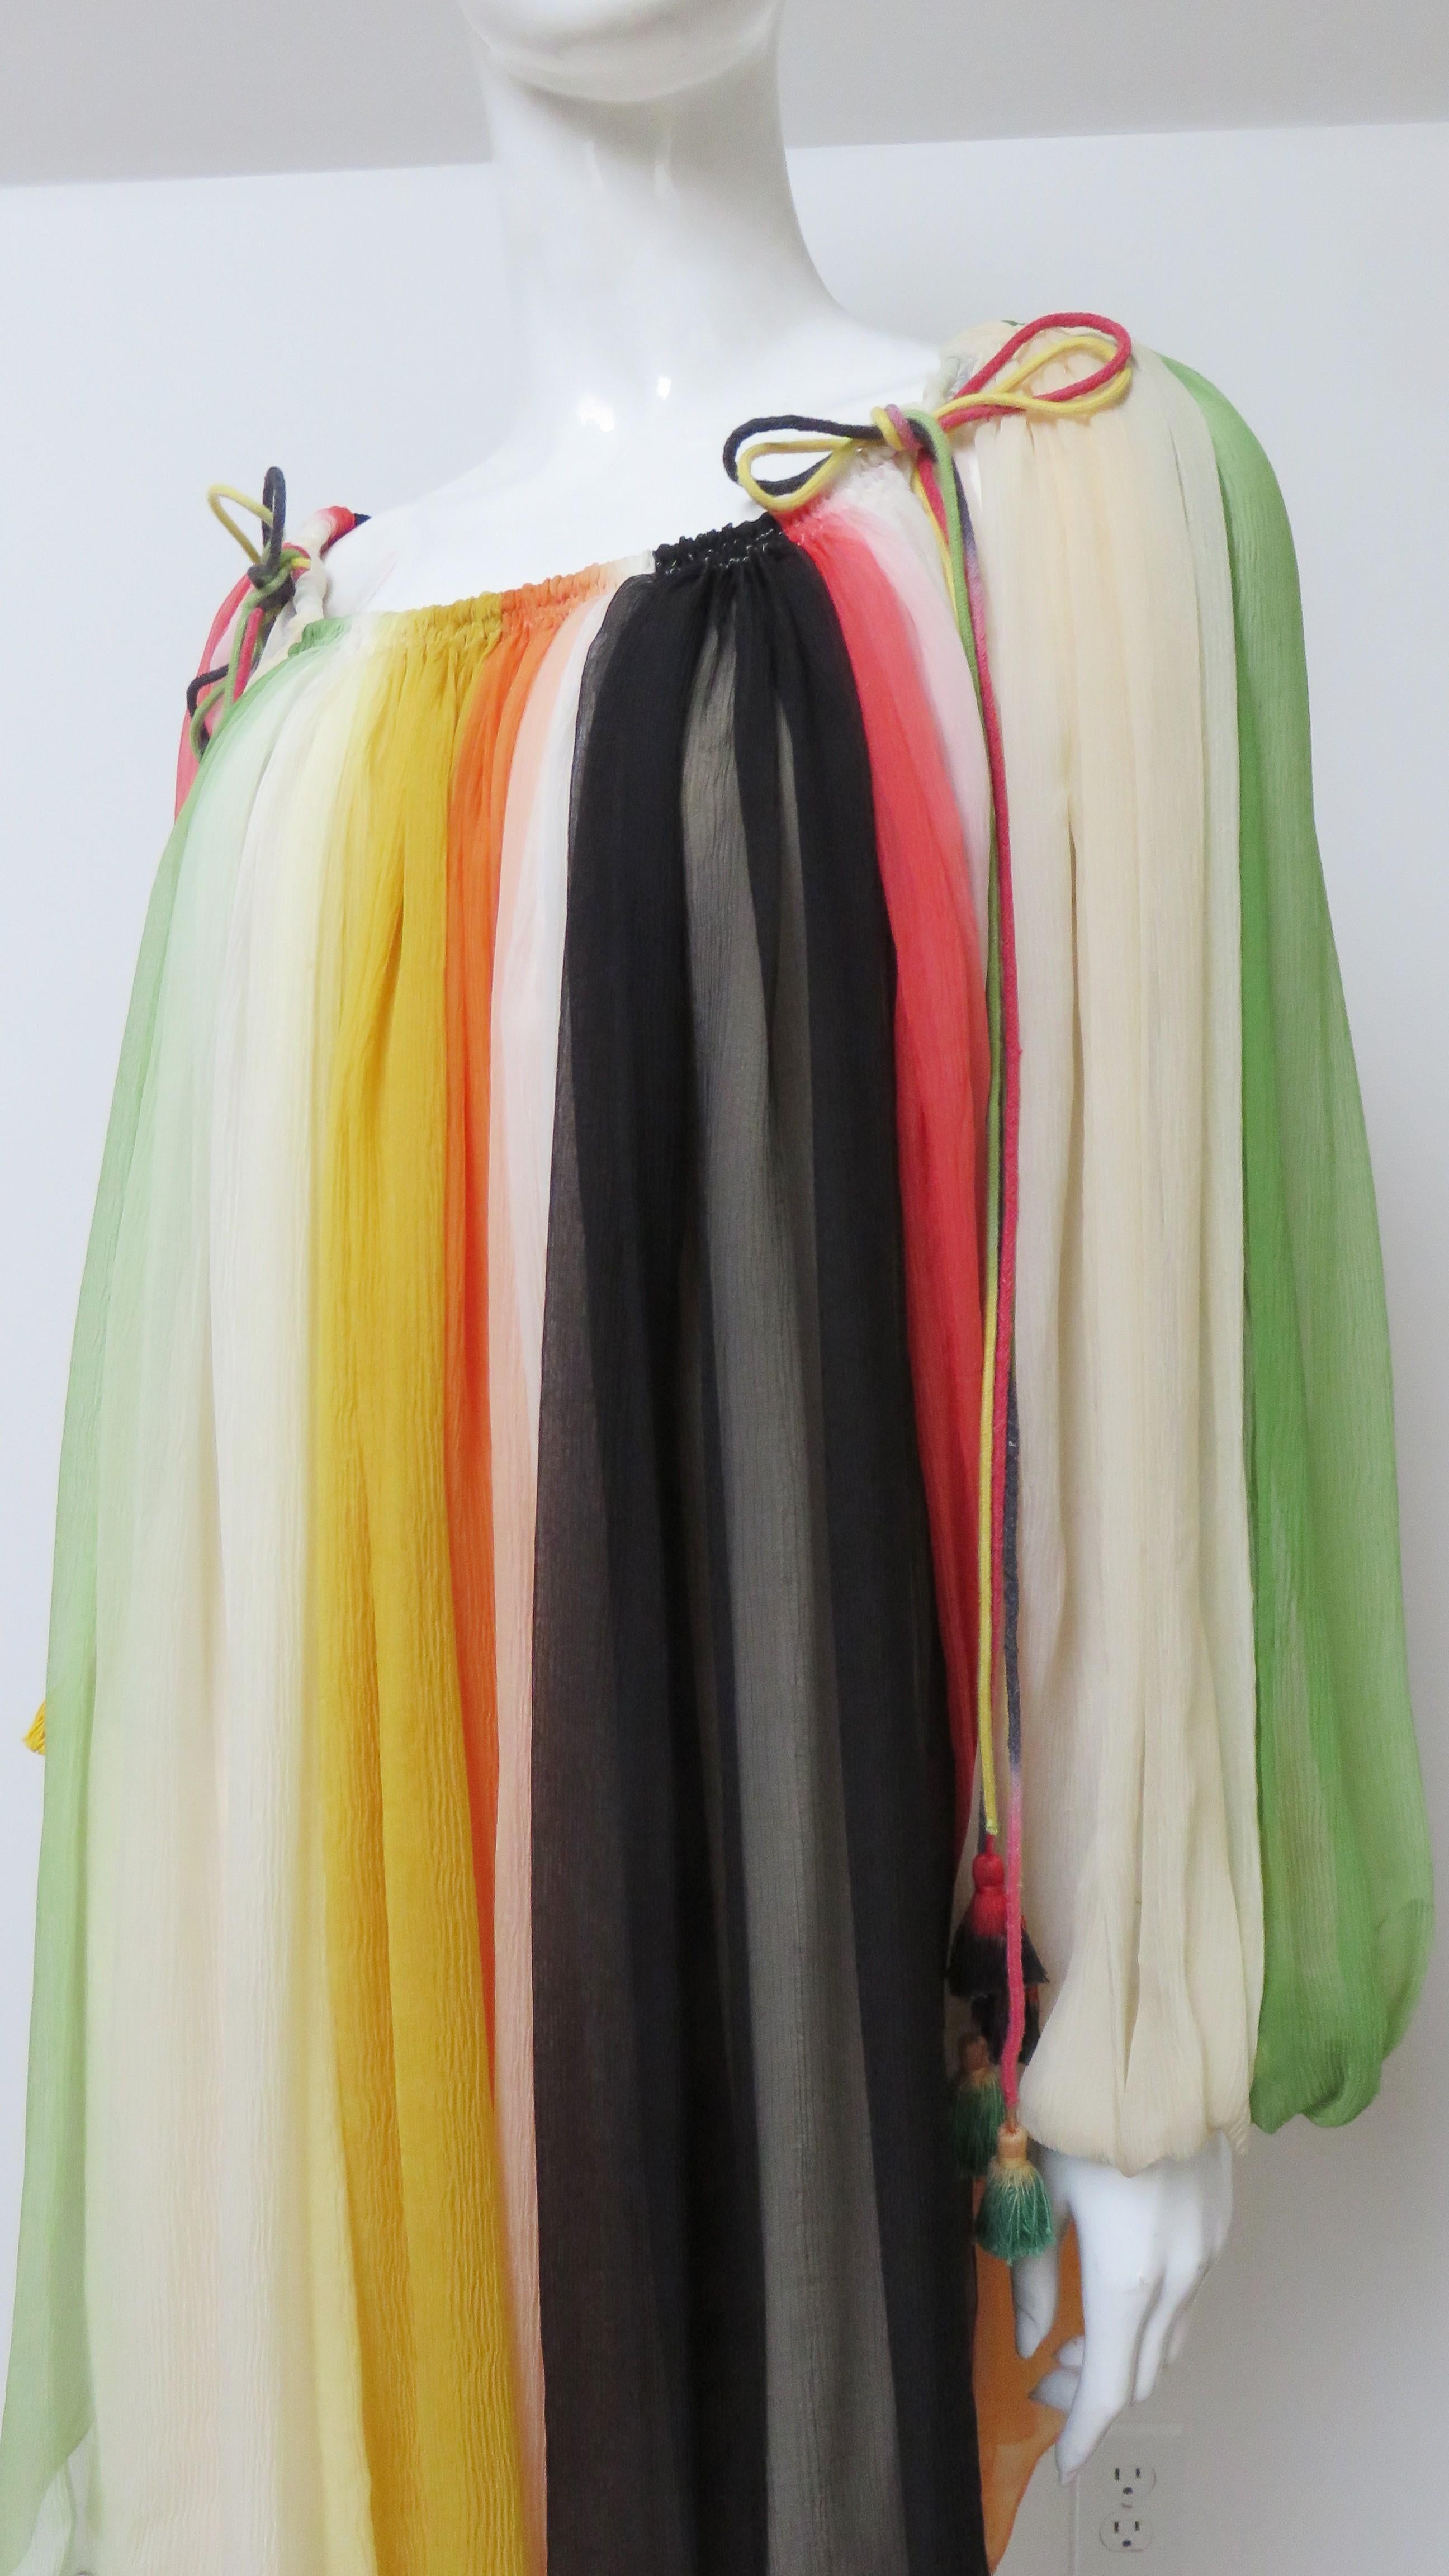 Chloe Silk Rainbow Baby Doll Dress S/S 2016 In Good Condition For Sale In Water Mill, NY